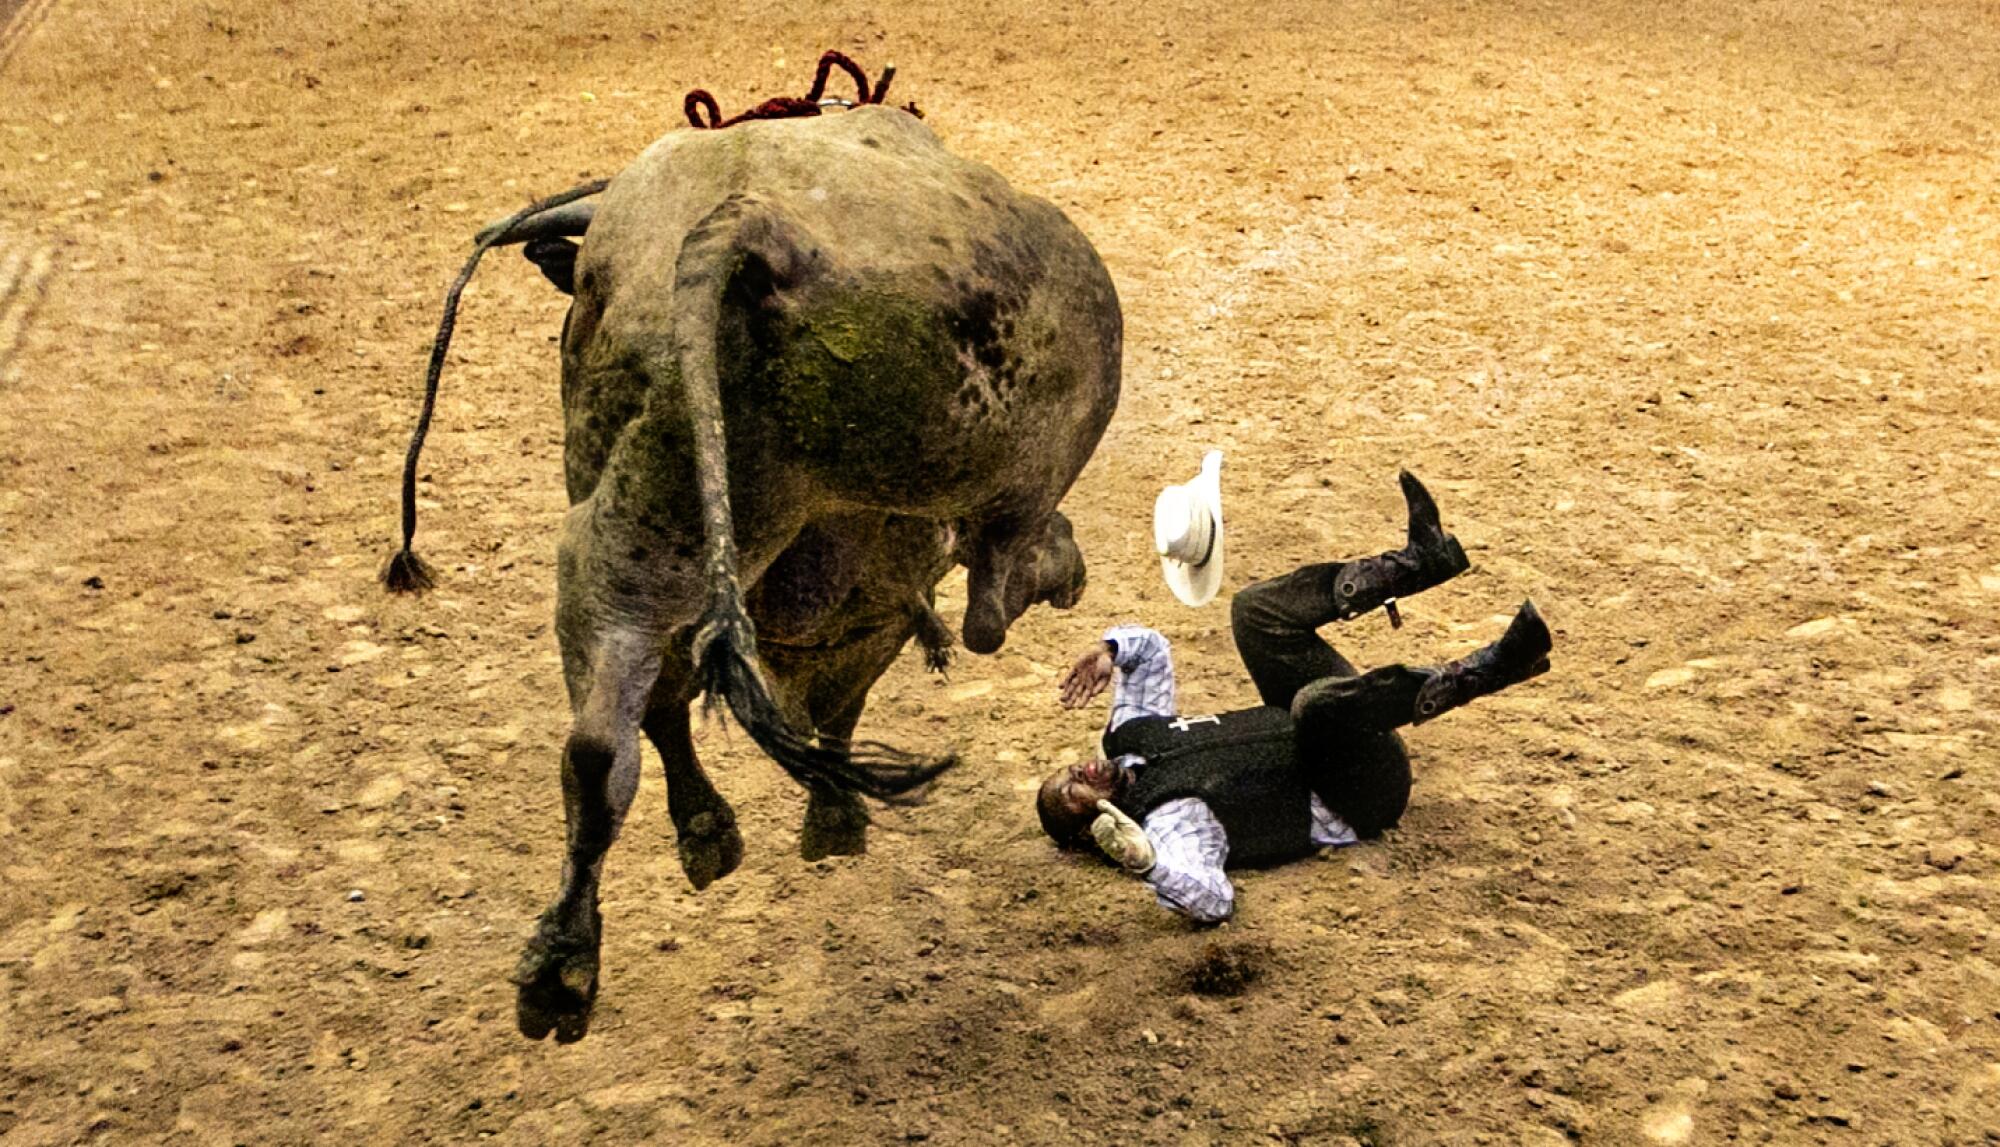 A cowboy falls to the dirt after being thrown by a bull